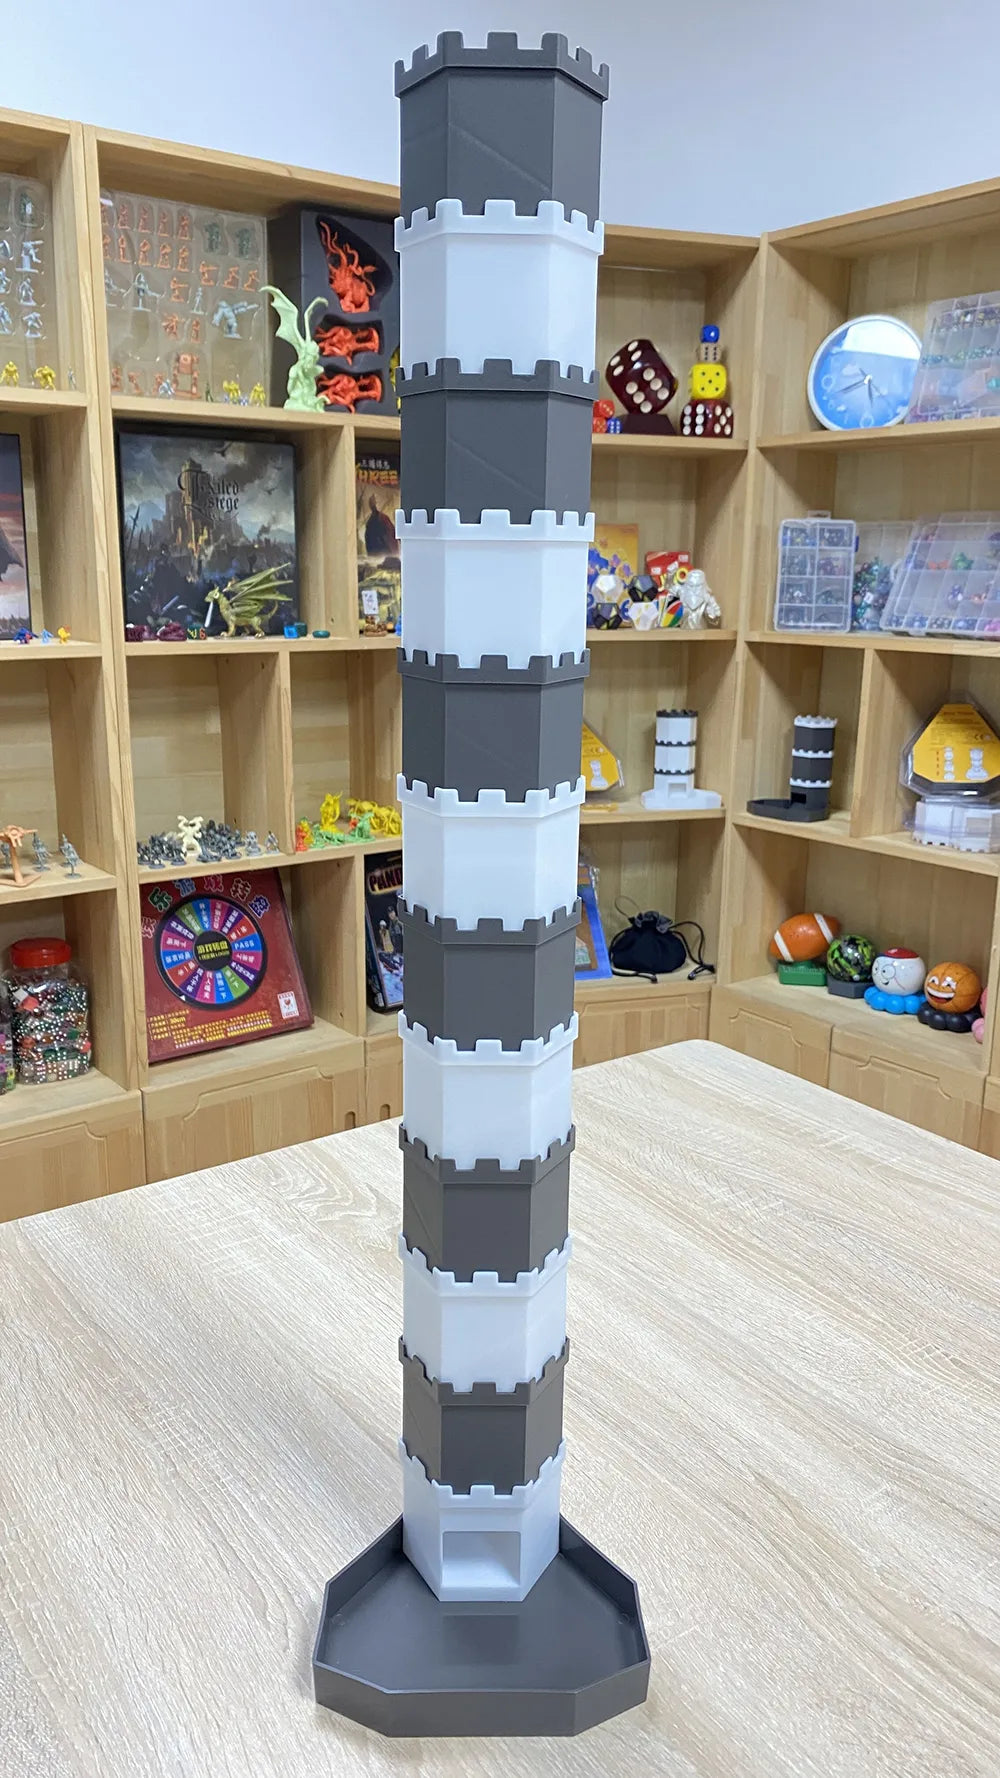 The Stackable Dice Tower